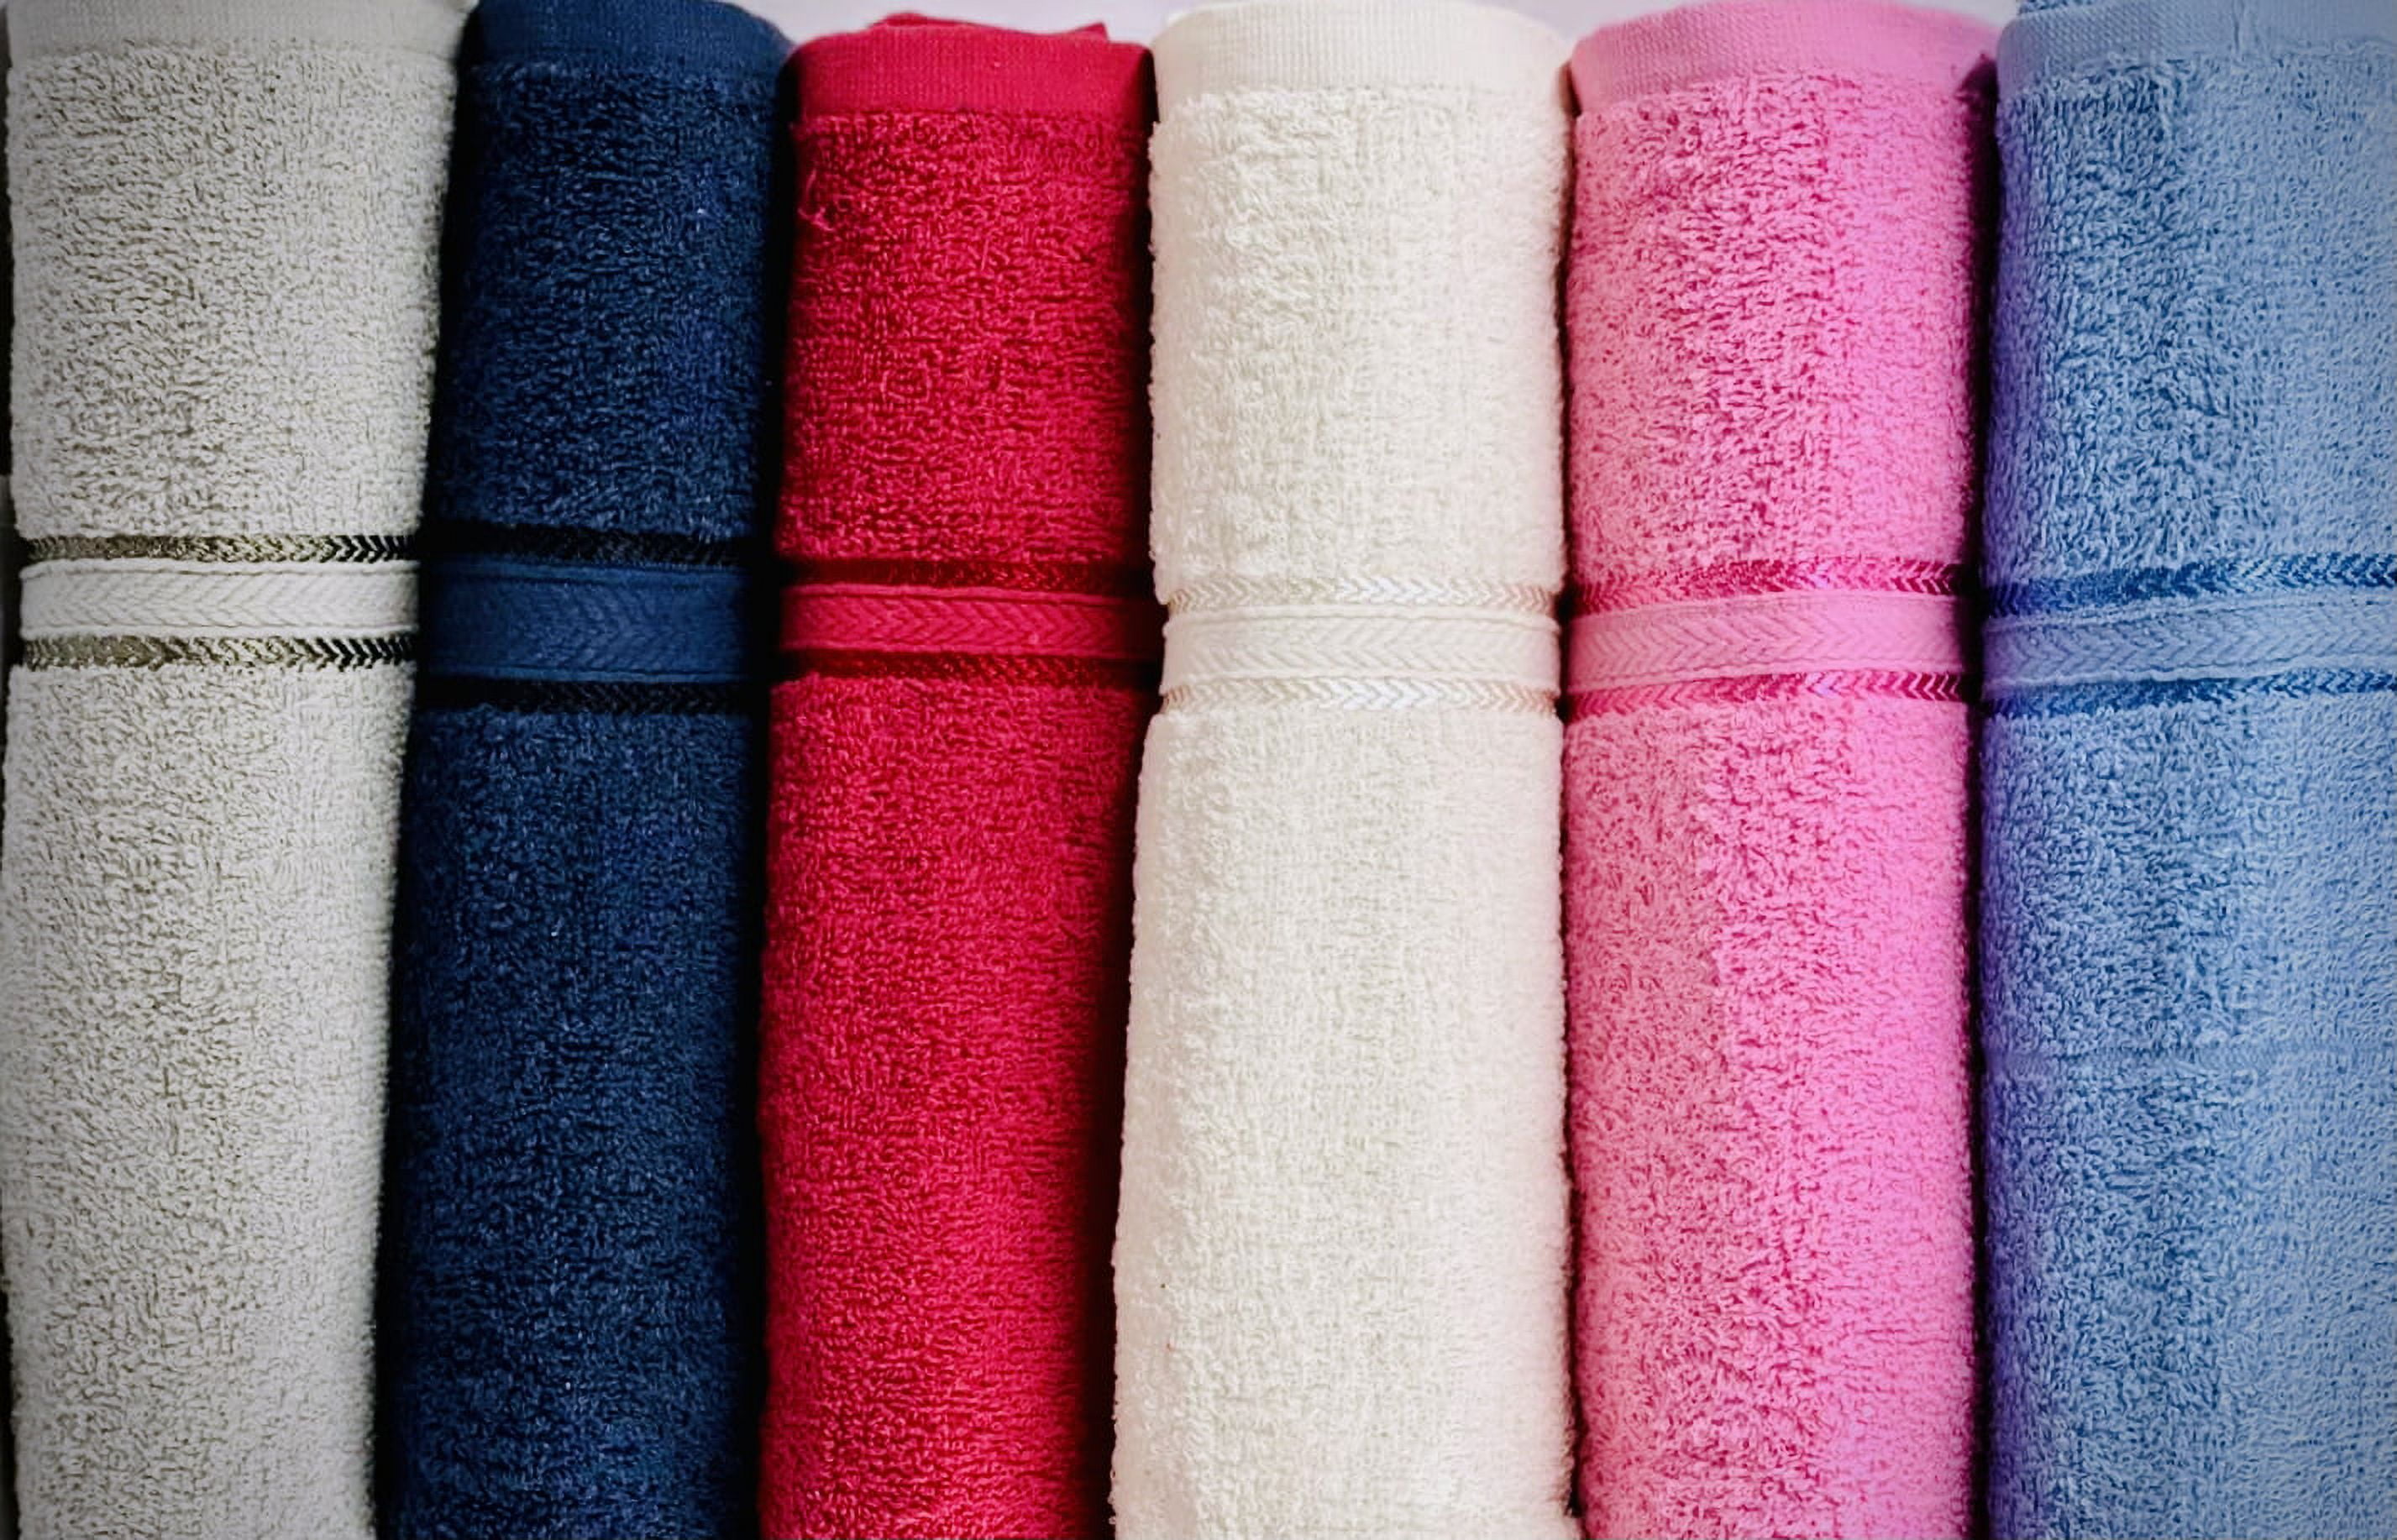 Large Bath Towels Pack of 6 100% Cotton 27x55 Highly Absorbent Soft  Multicolor 